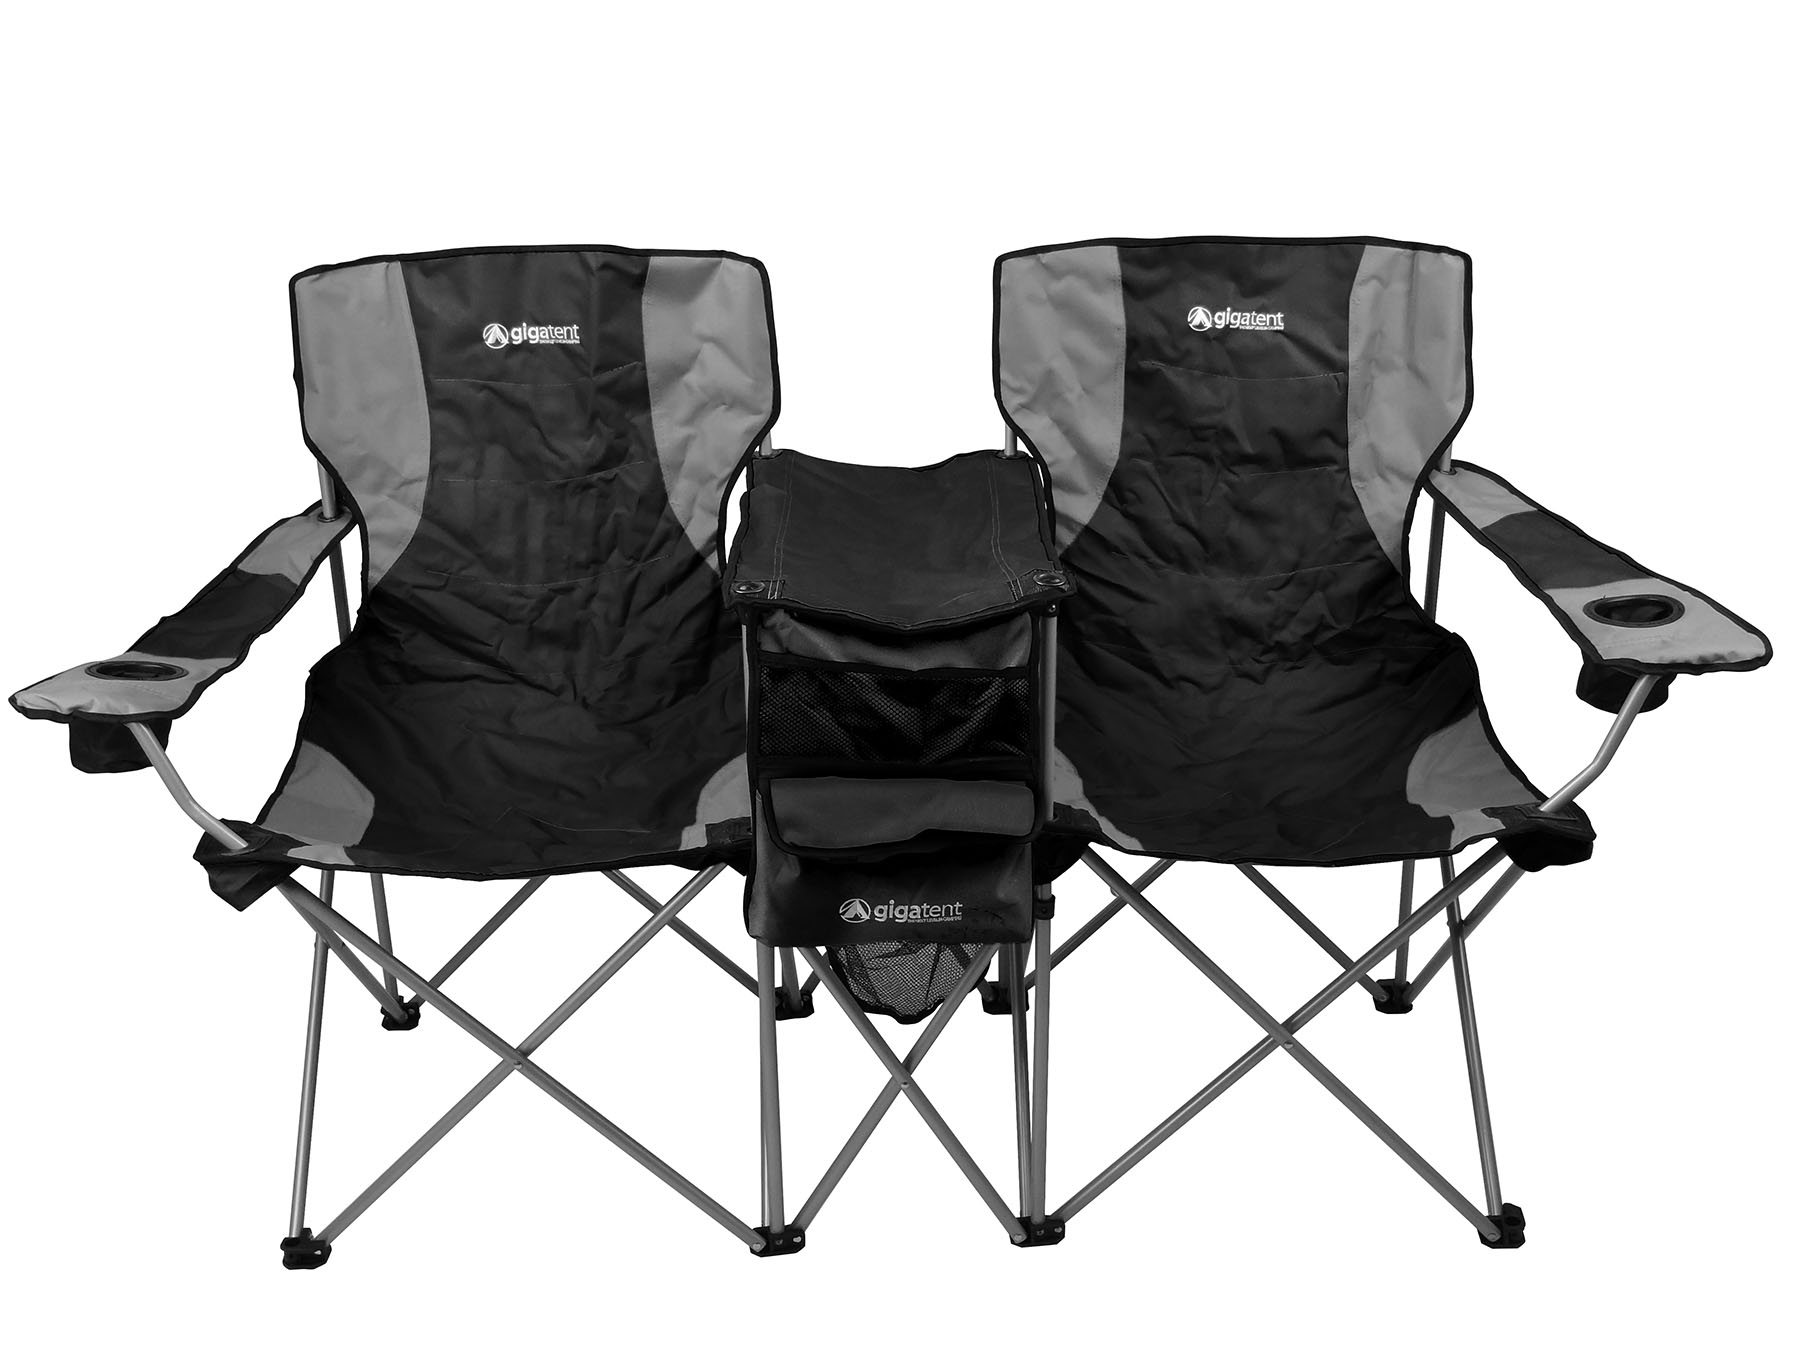 GigaTent Double Outdoor Chairs – 2 Side by Side Folding Quad Camping Seats, Black - image 3 of 5